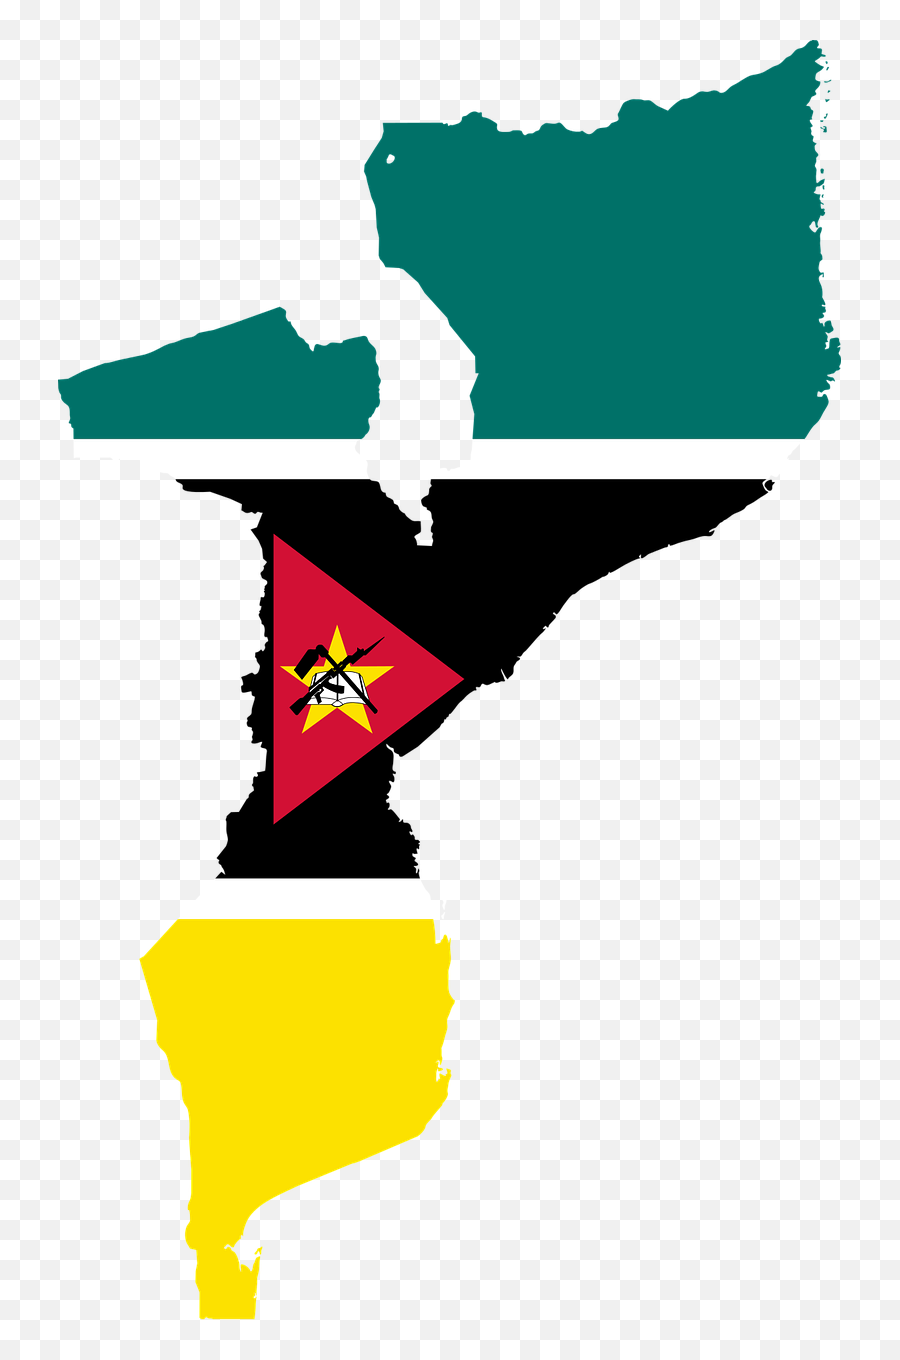 History Meaning Color Codes U0026 Pictures Of Mozambique Flag - Mozambique Flag Map Emoji,Guatemala Flag Emoji